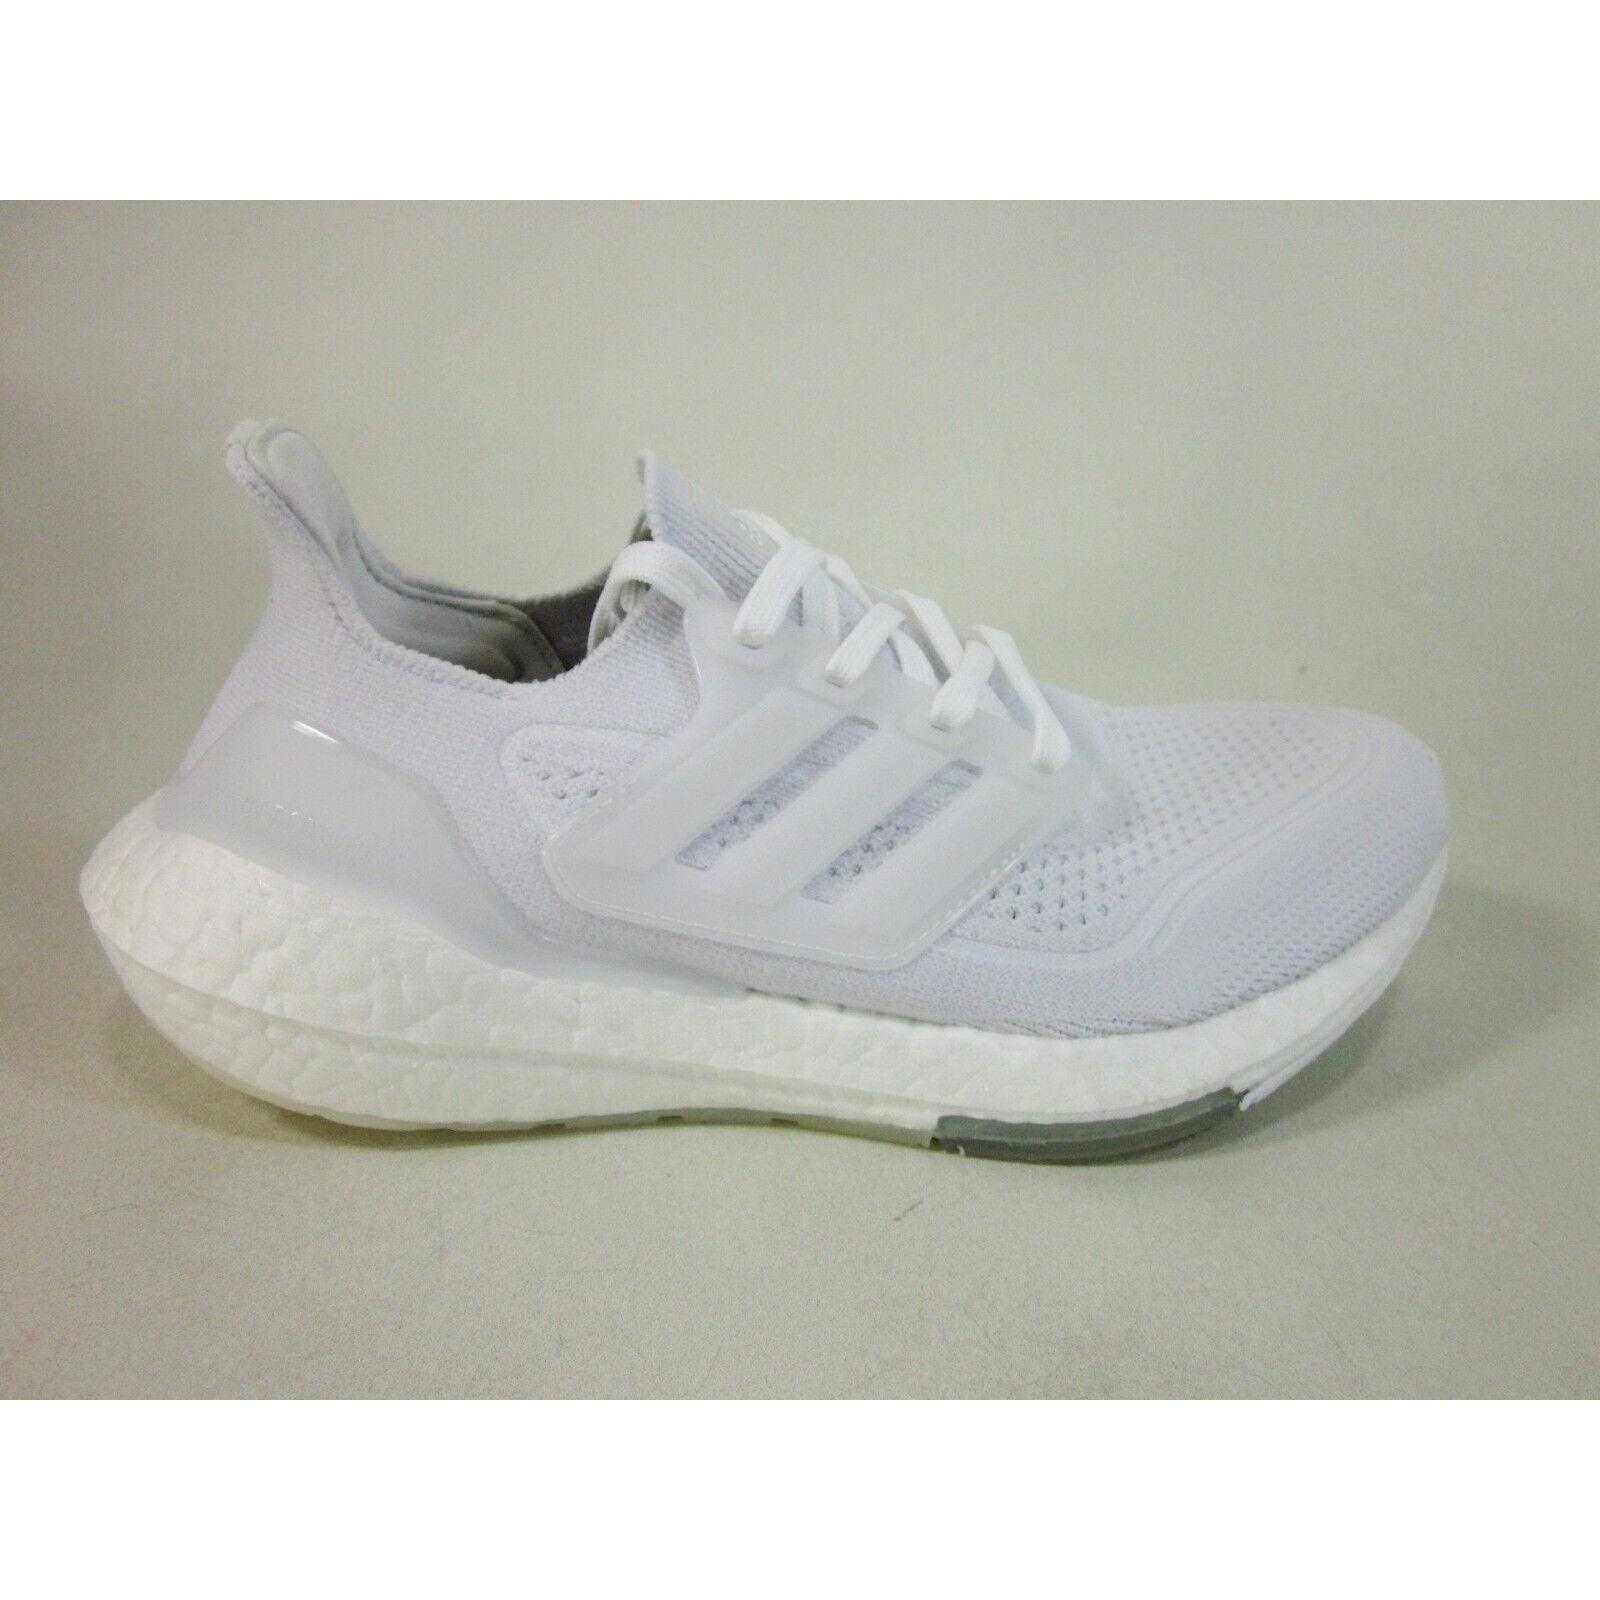 Adidas shoes Ultraboost - White/Grey 0